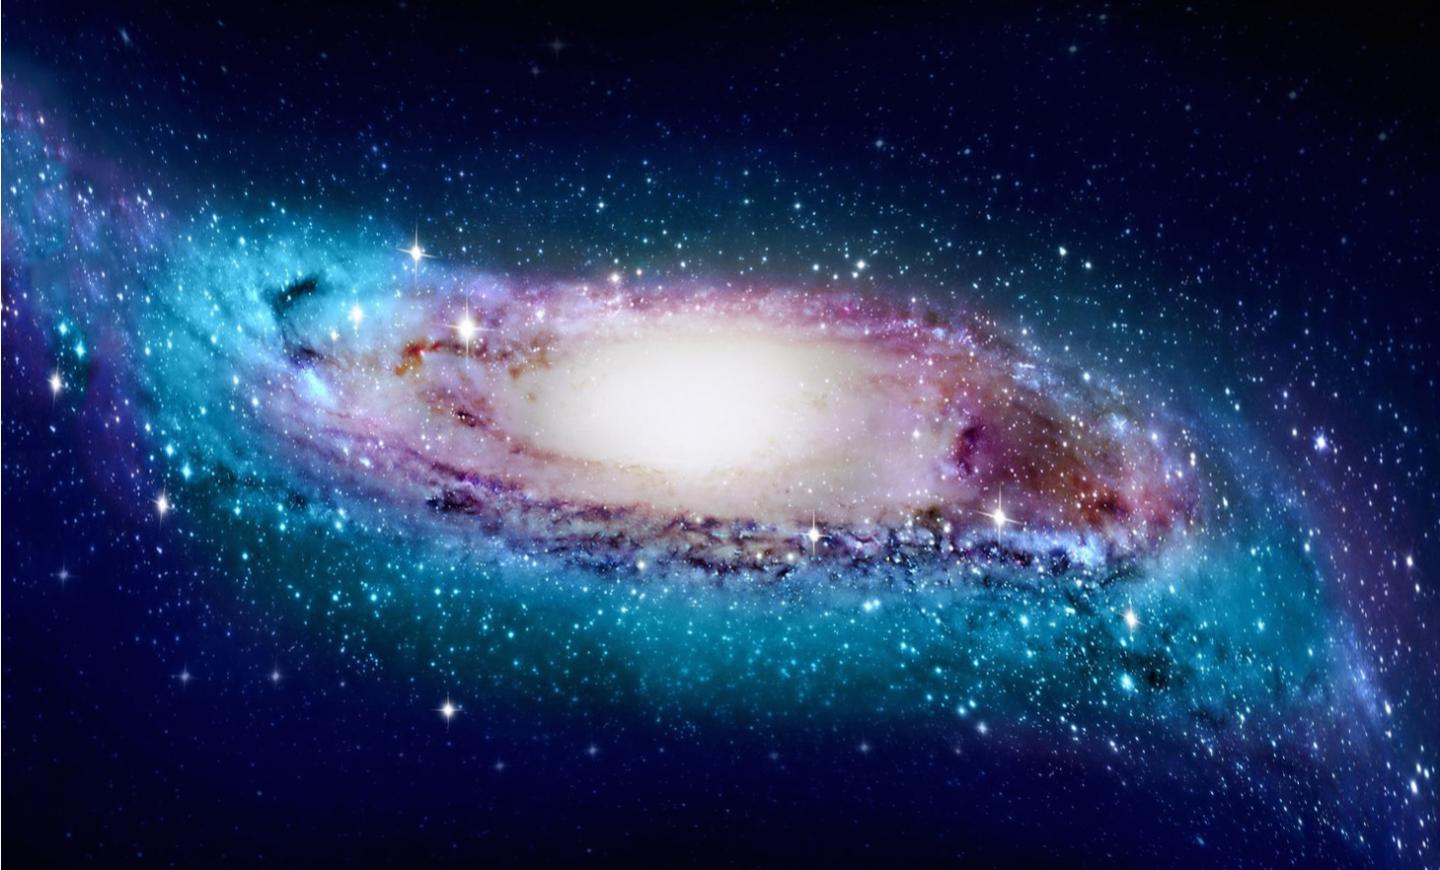 Artist's Impression of the Warped and Twisted Milky Way Disk